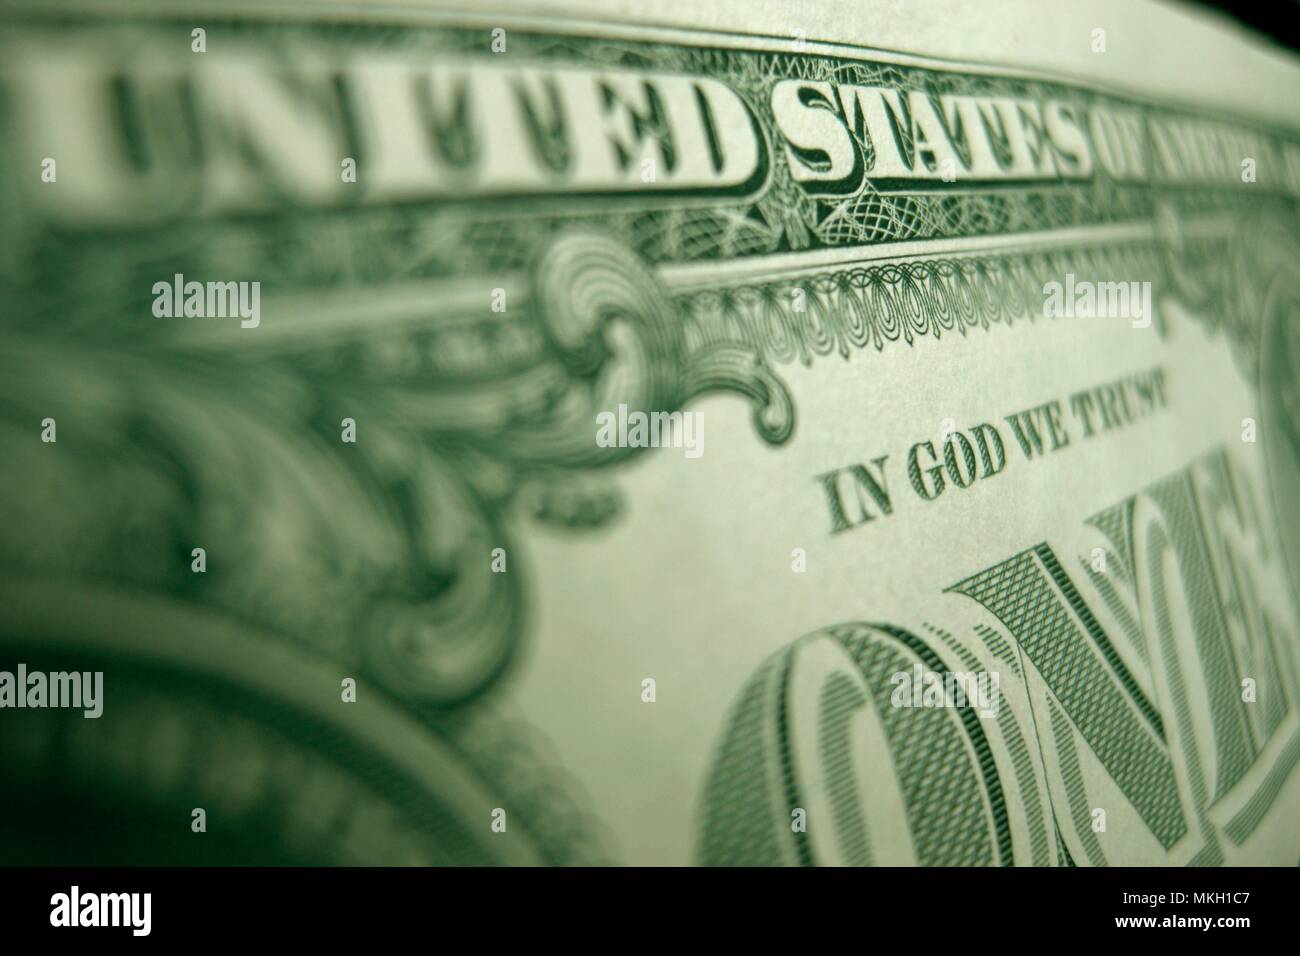 Shallow focus of the word 'GOD' on the back of a US Federal Reserve banknote. Stock Photo